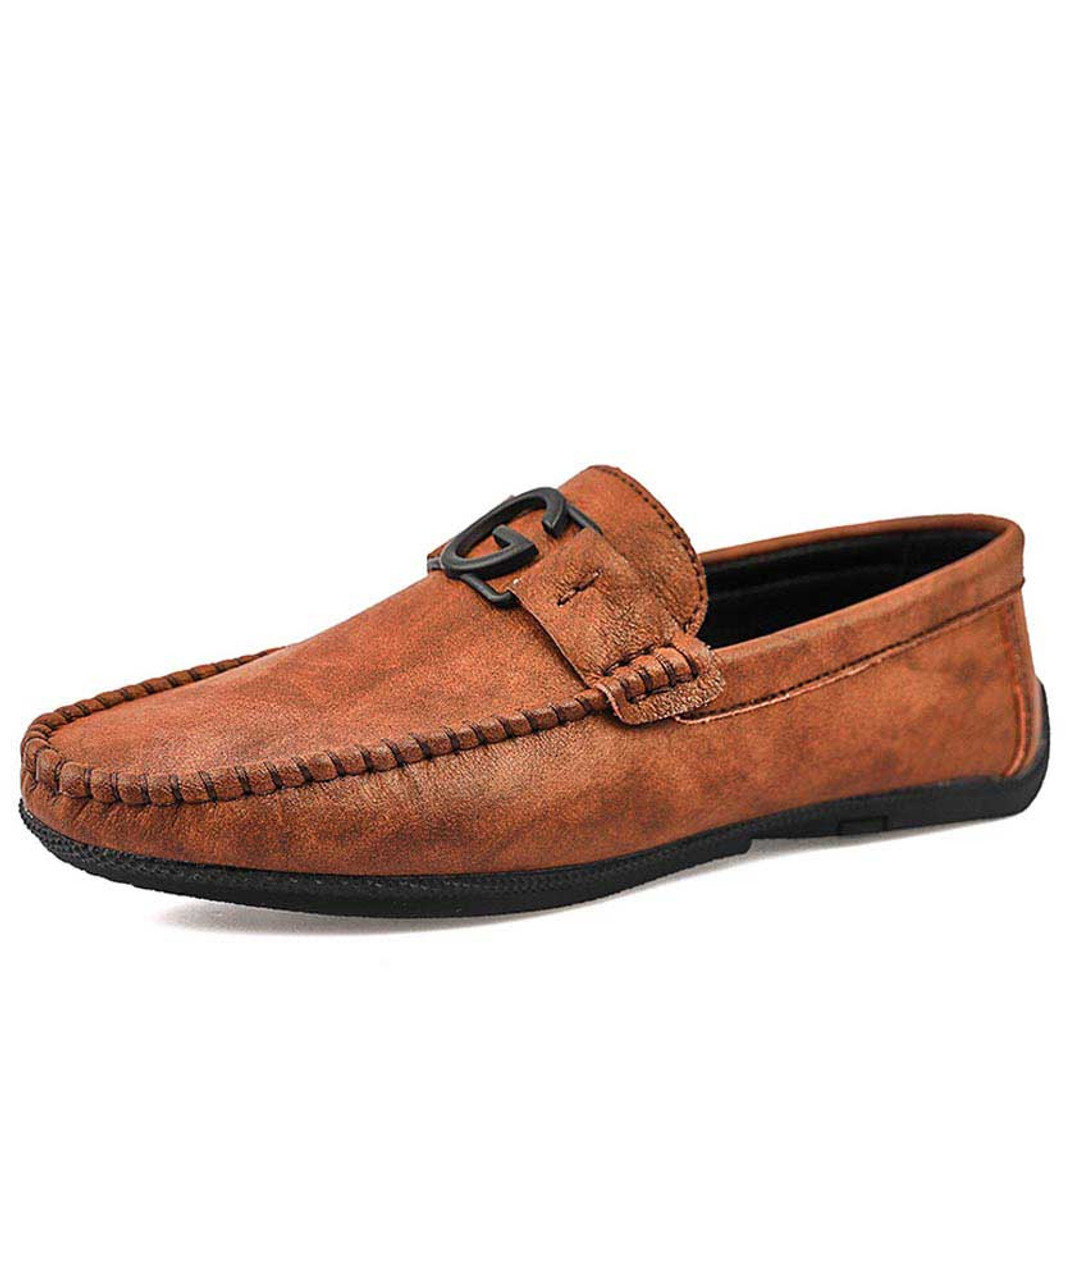 slip on loafers canada